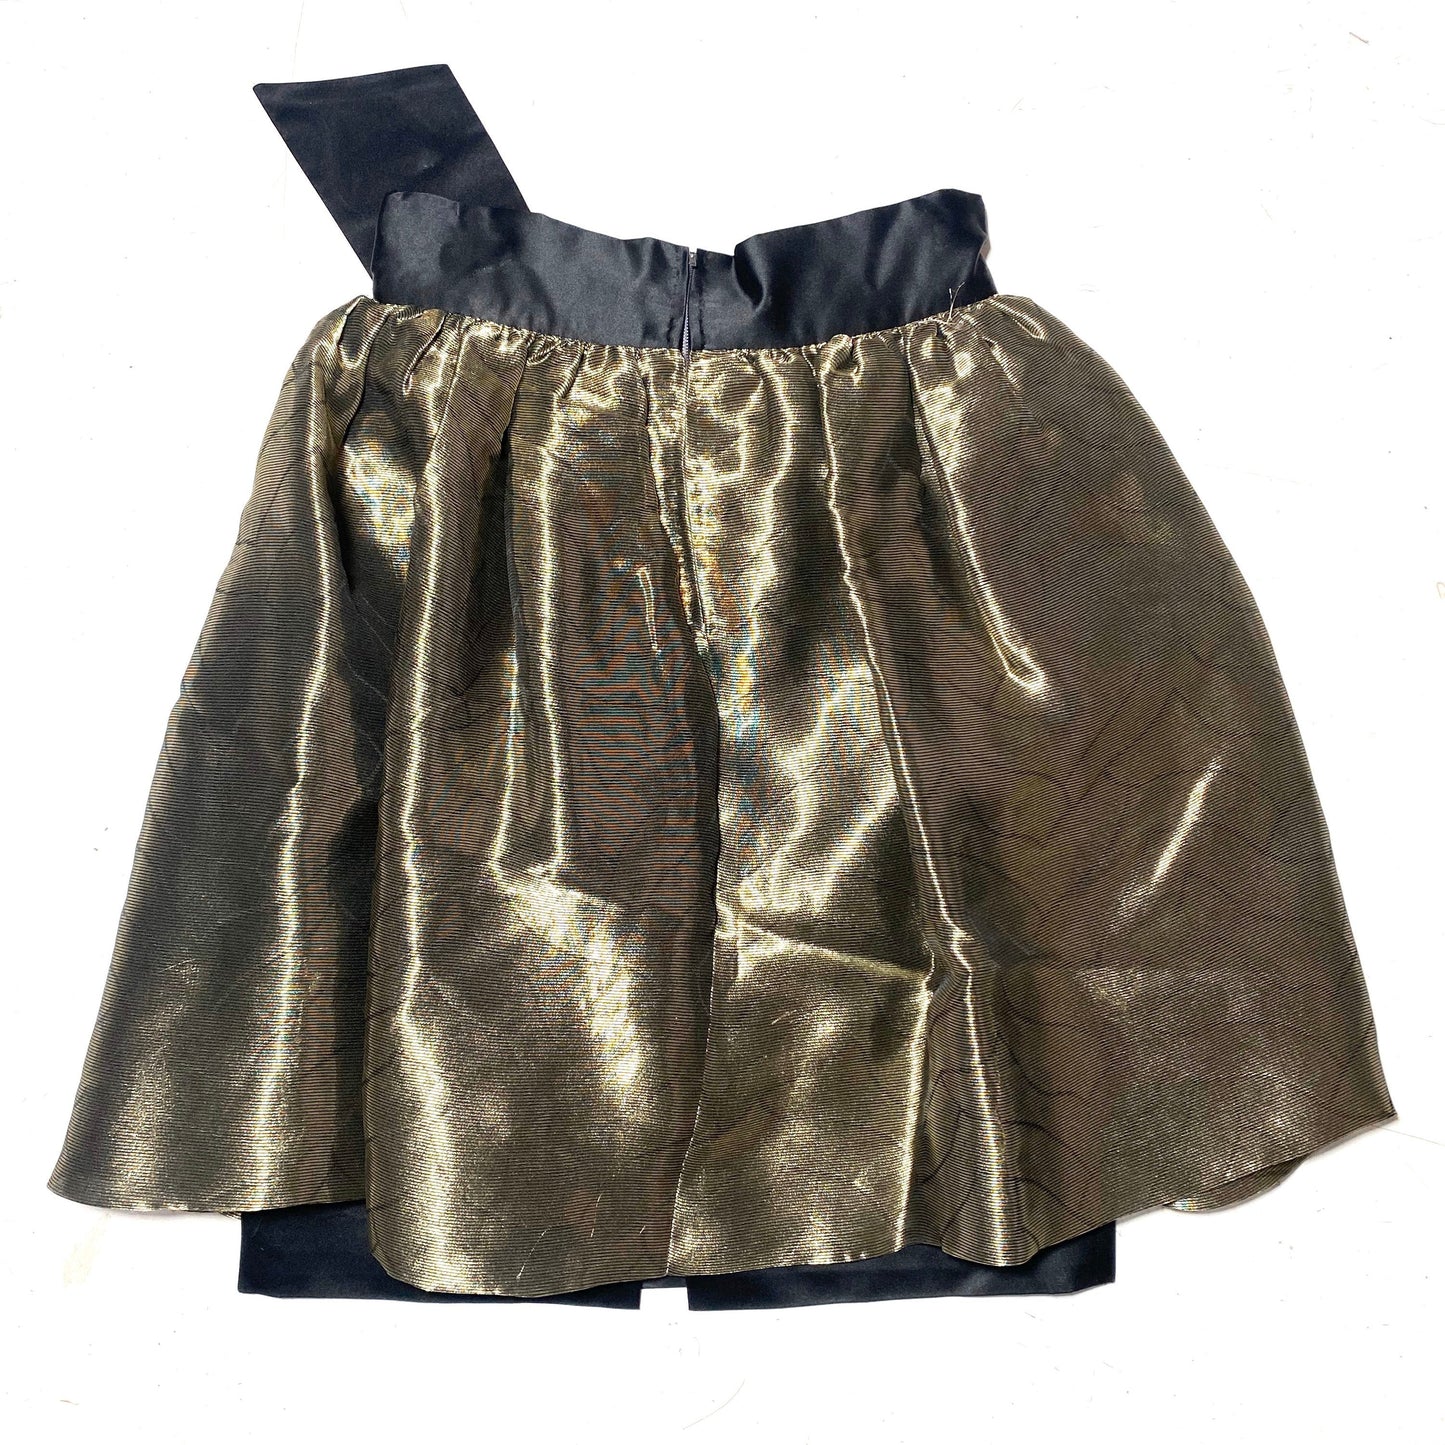 Emporio Armani 80s shiny and elegant gold / black skirt, made in Italy mint condition.